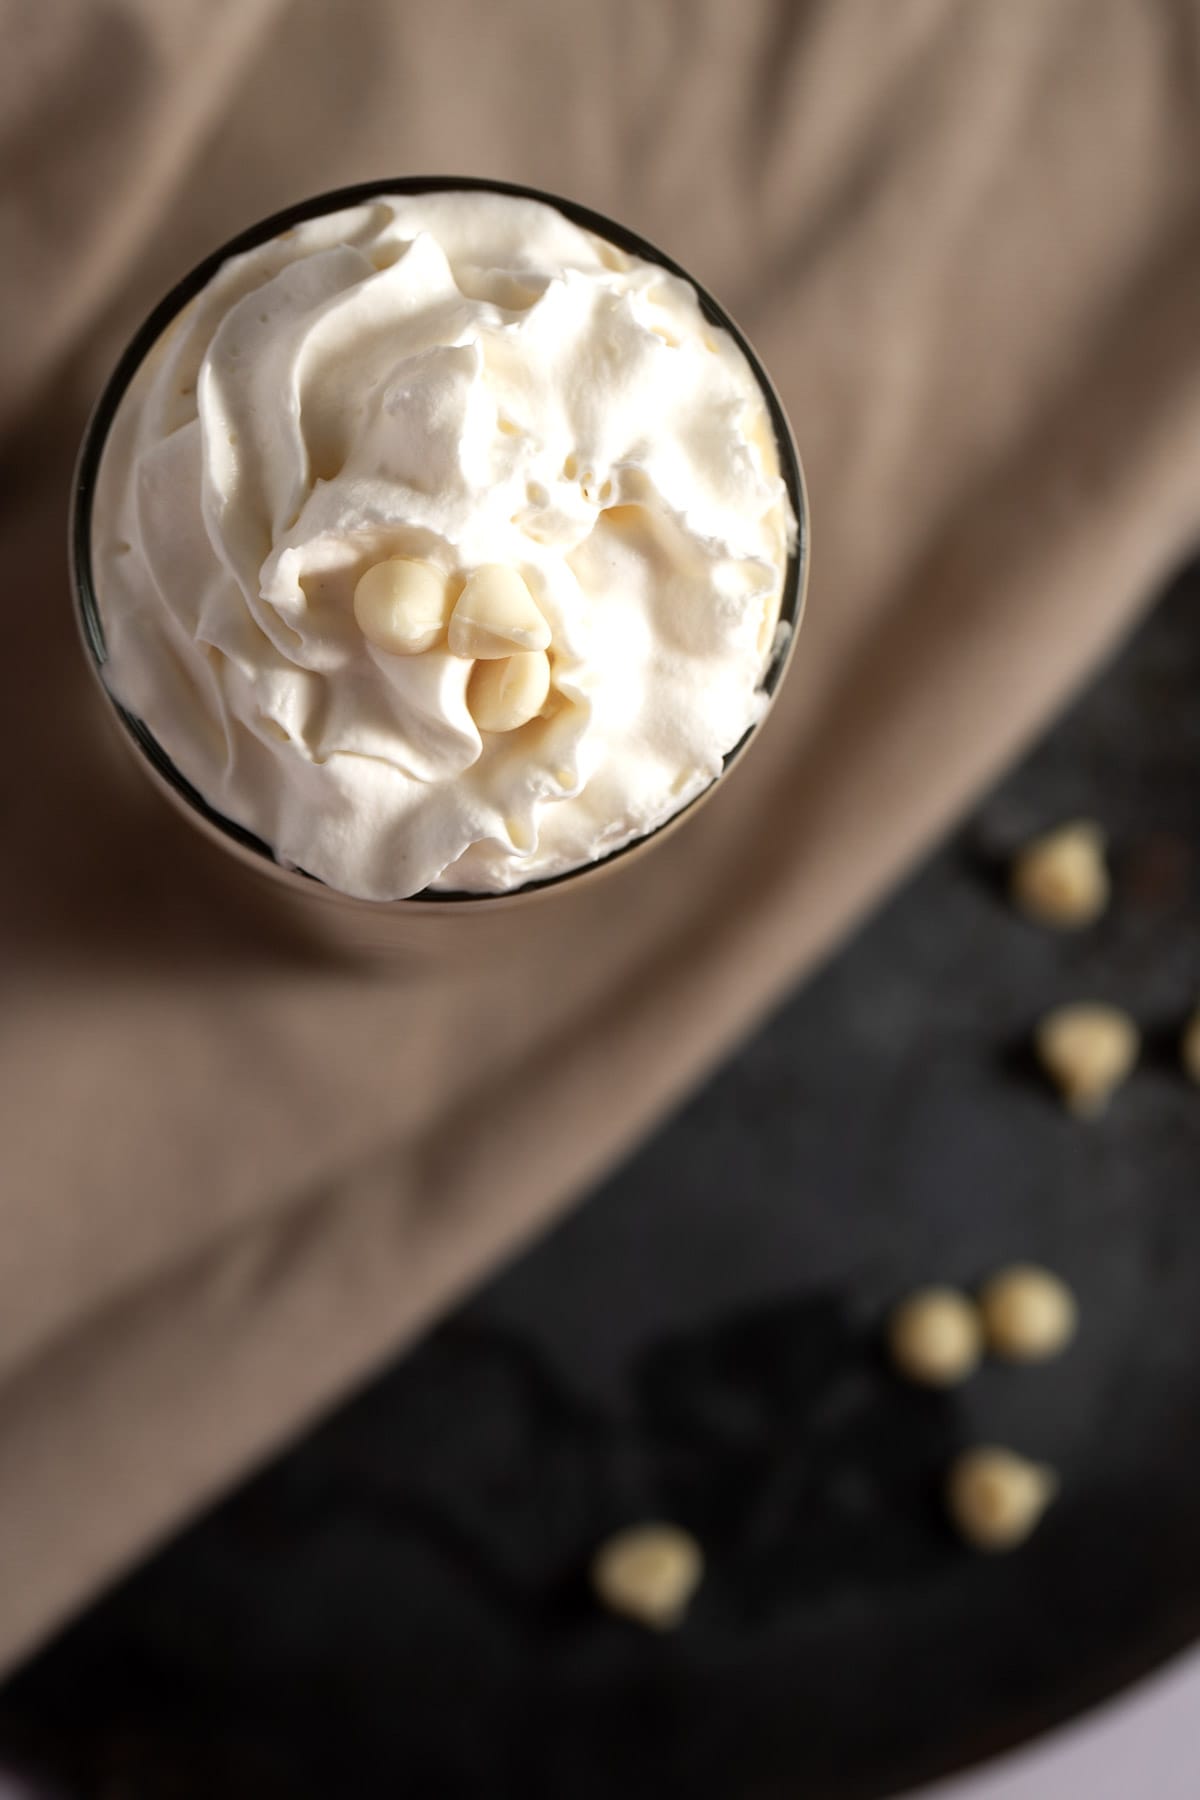 Overhead view of an iced latte, topped with whipped cream, sitting on a black metal plate, next to a brown napkin.